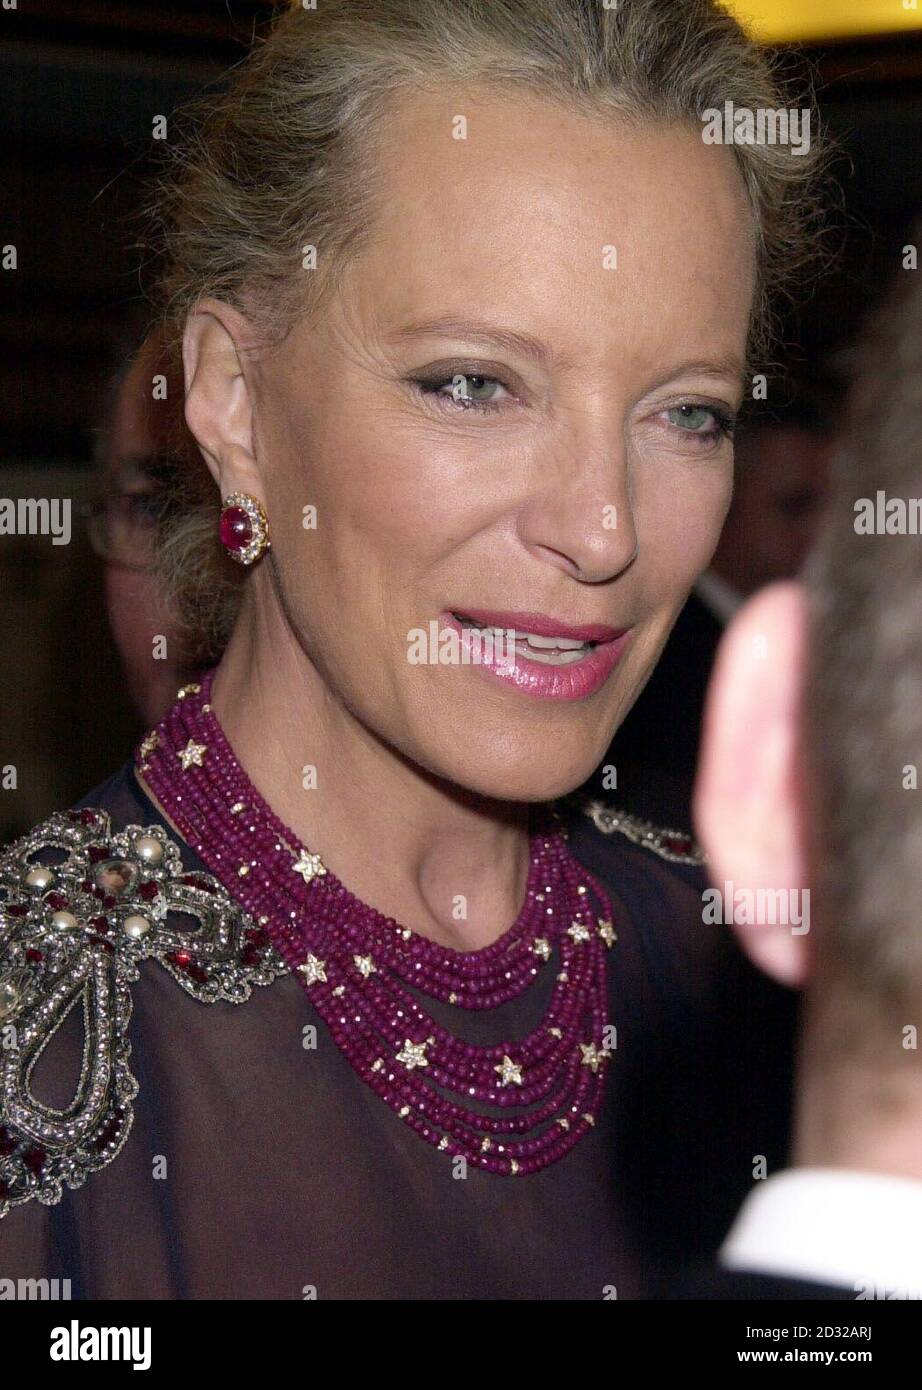 Princess Michael of Kent during the SPARKS (Sport Aiding medical Research for Kids) 2001 Winter Ball at the Park Lane Hilton in London. Stock Photo